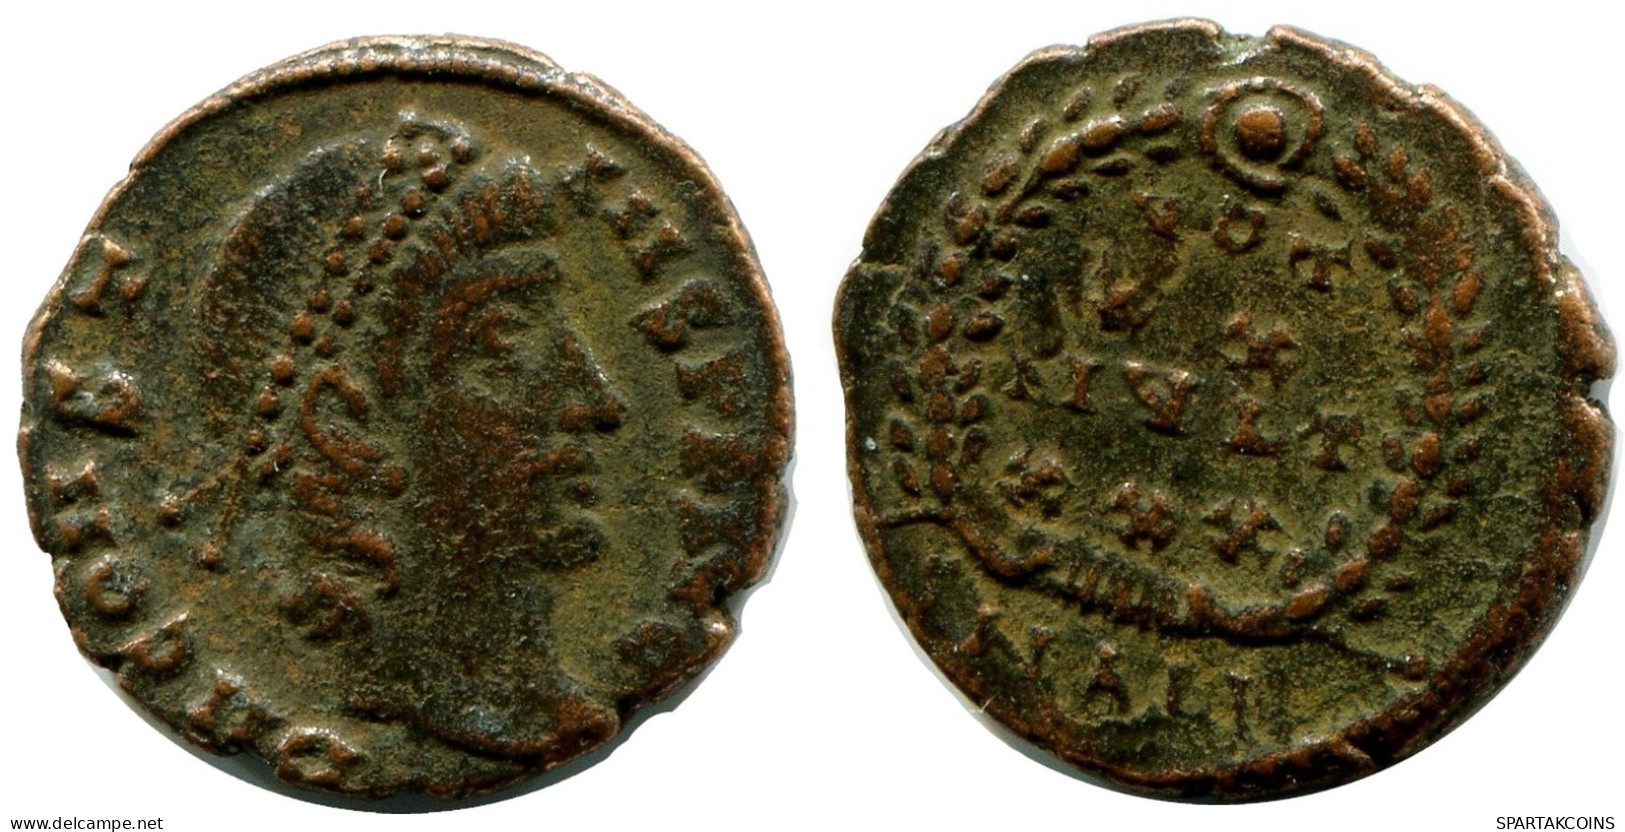 CONSTANS MINTED IN ALEKSANDRIA FROM THE ROYAL ONTARIO MUSEUM #ANC11474.14.F.A - L'Empire Chrétien (307 à 363)